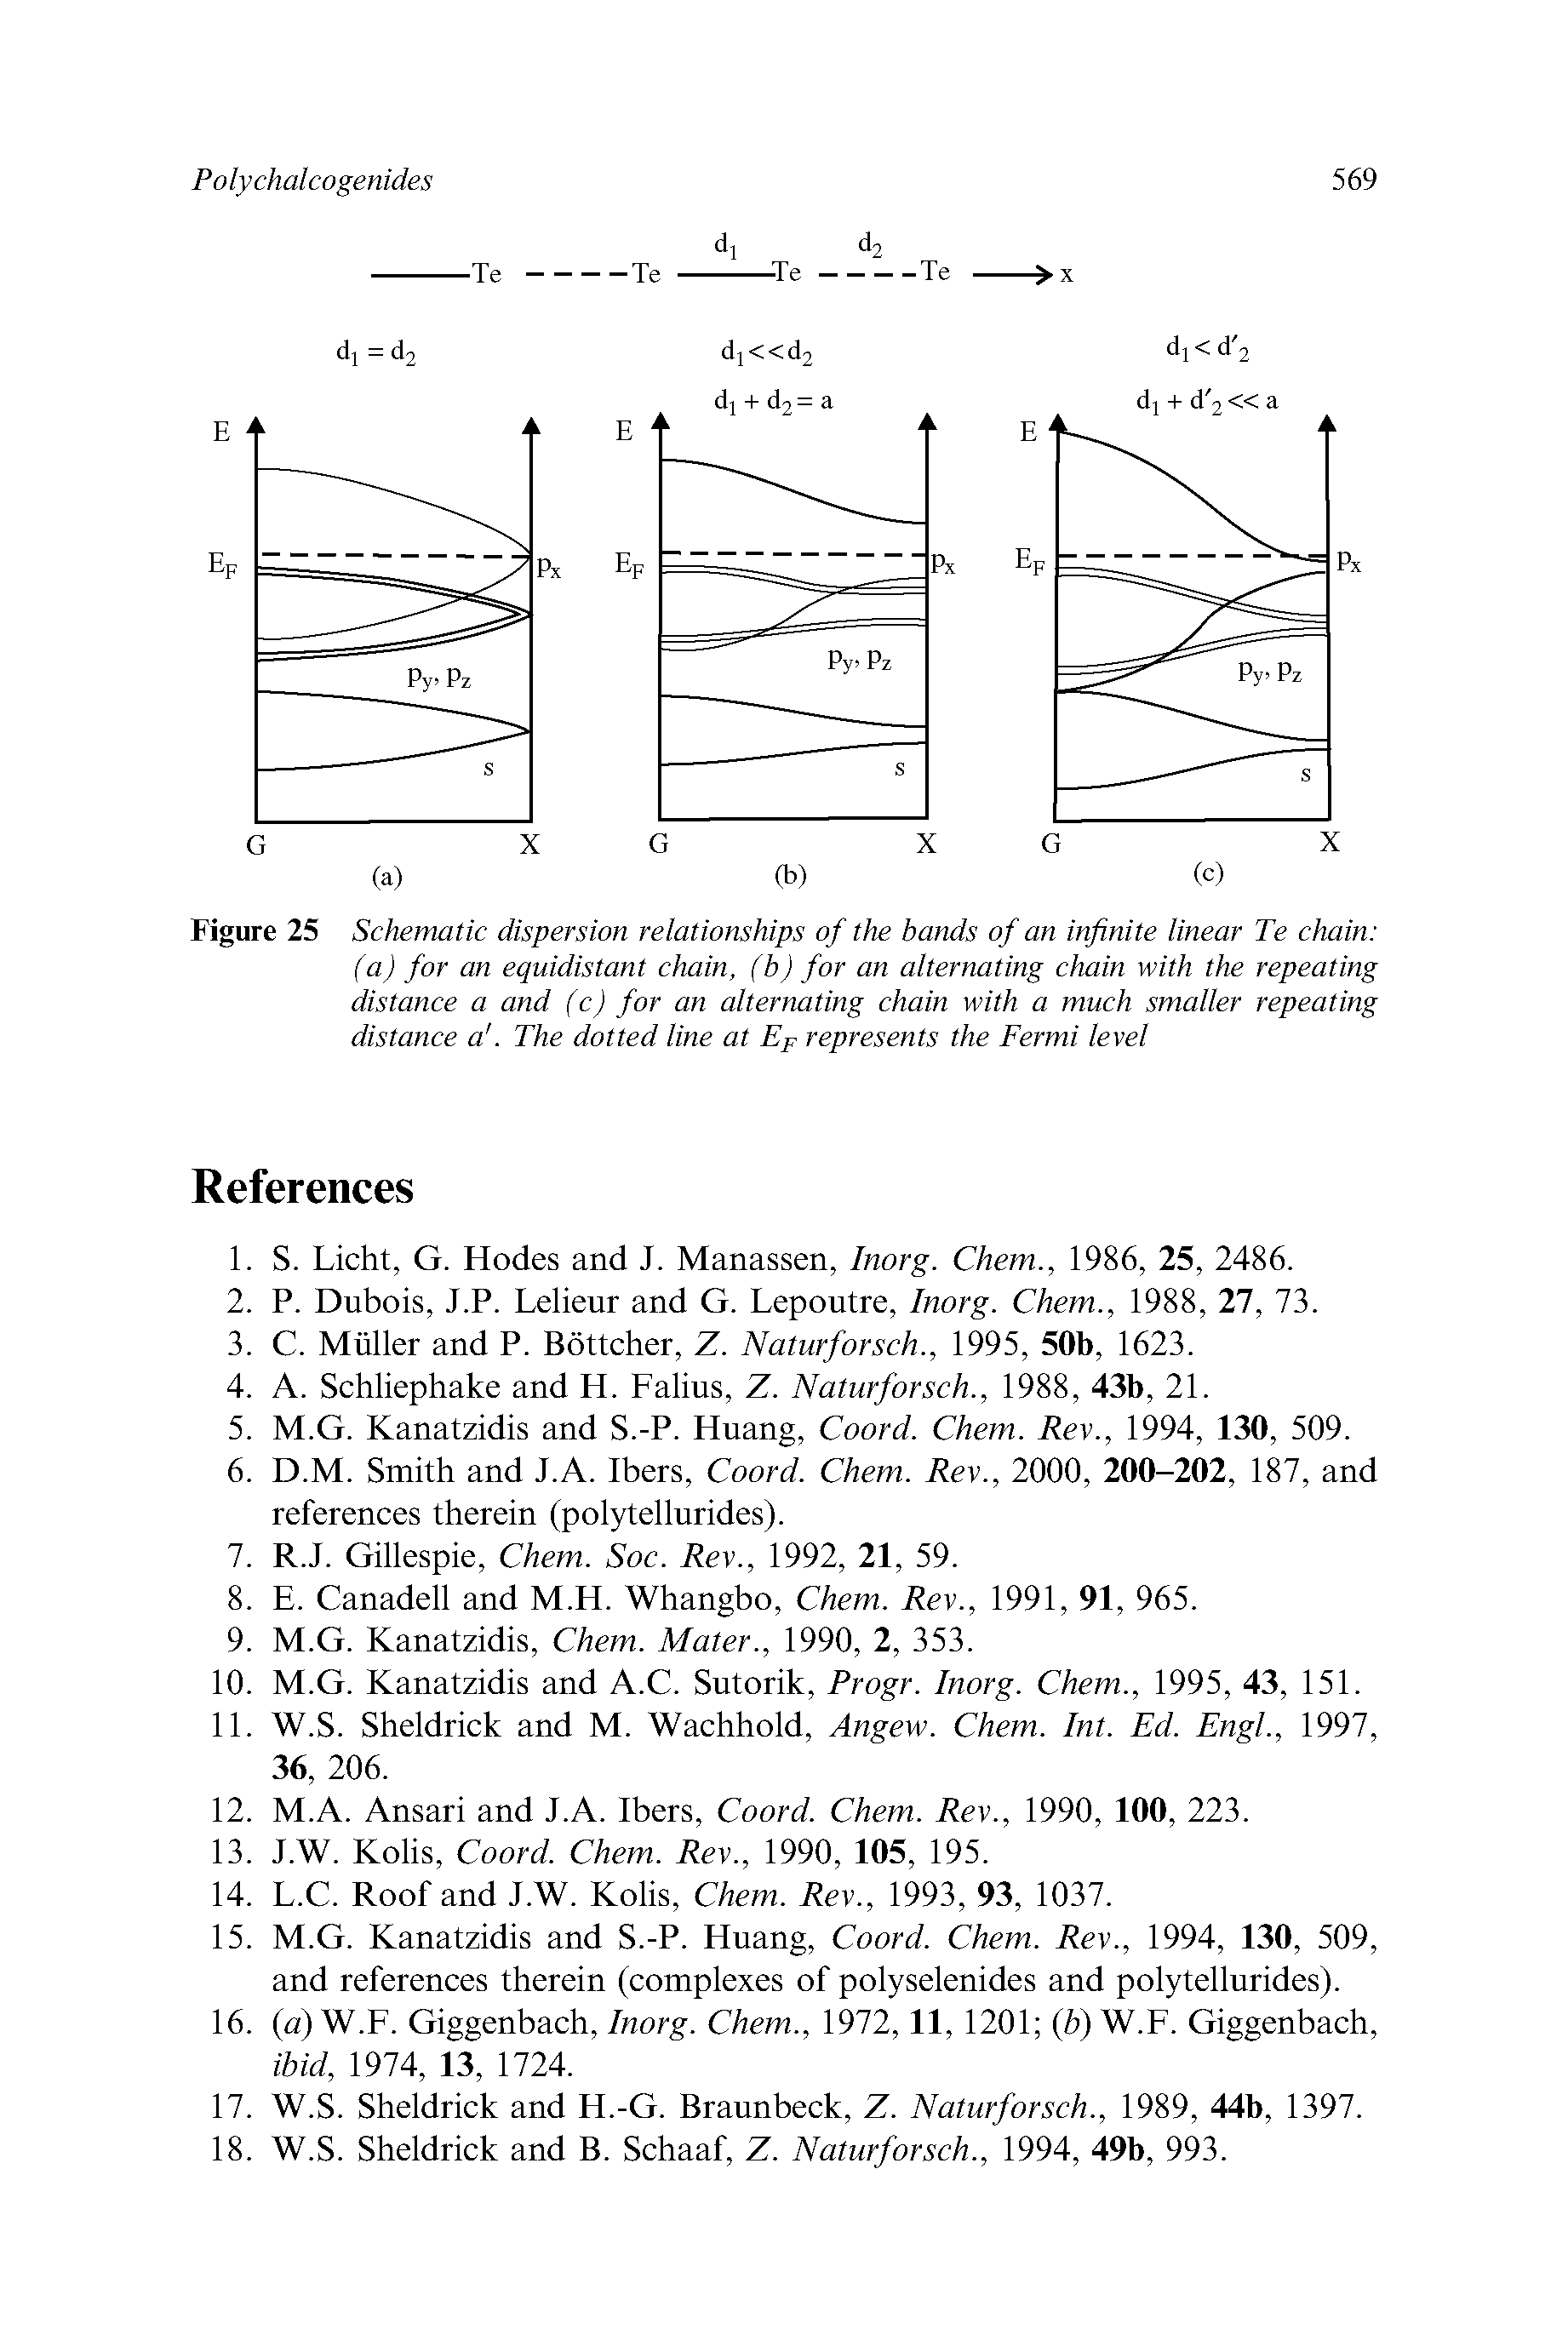 Figure 25 Schematic dispersion relationships of the bands of an infinite linear Te chain (a) for an equidistant chain, (b) for an alternating chain with the repeating distance a and (c) for an alternating chain with a much smaller repeating distance a. The dotted line at EF represents the Fermi level...